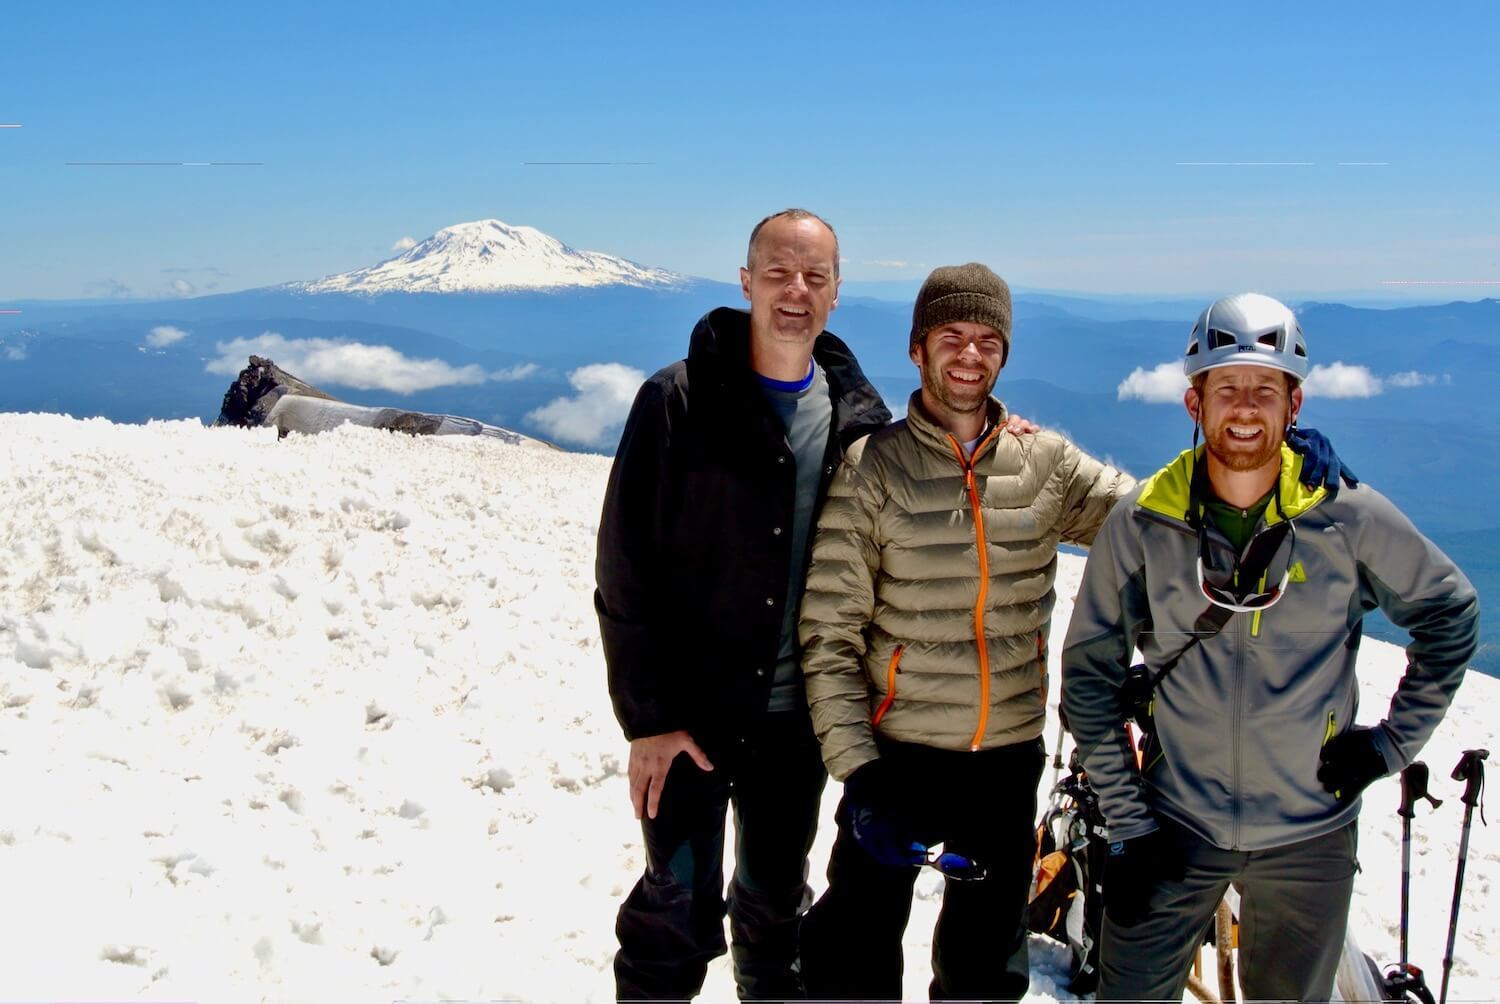 Three hikers at the summit of Mt. St. Helens, with the rim to the crater in behind them in gray. There is snow on the ground and they are wearing hiking gear. In the distance Mt. Adams rises up amongst blue skies.